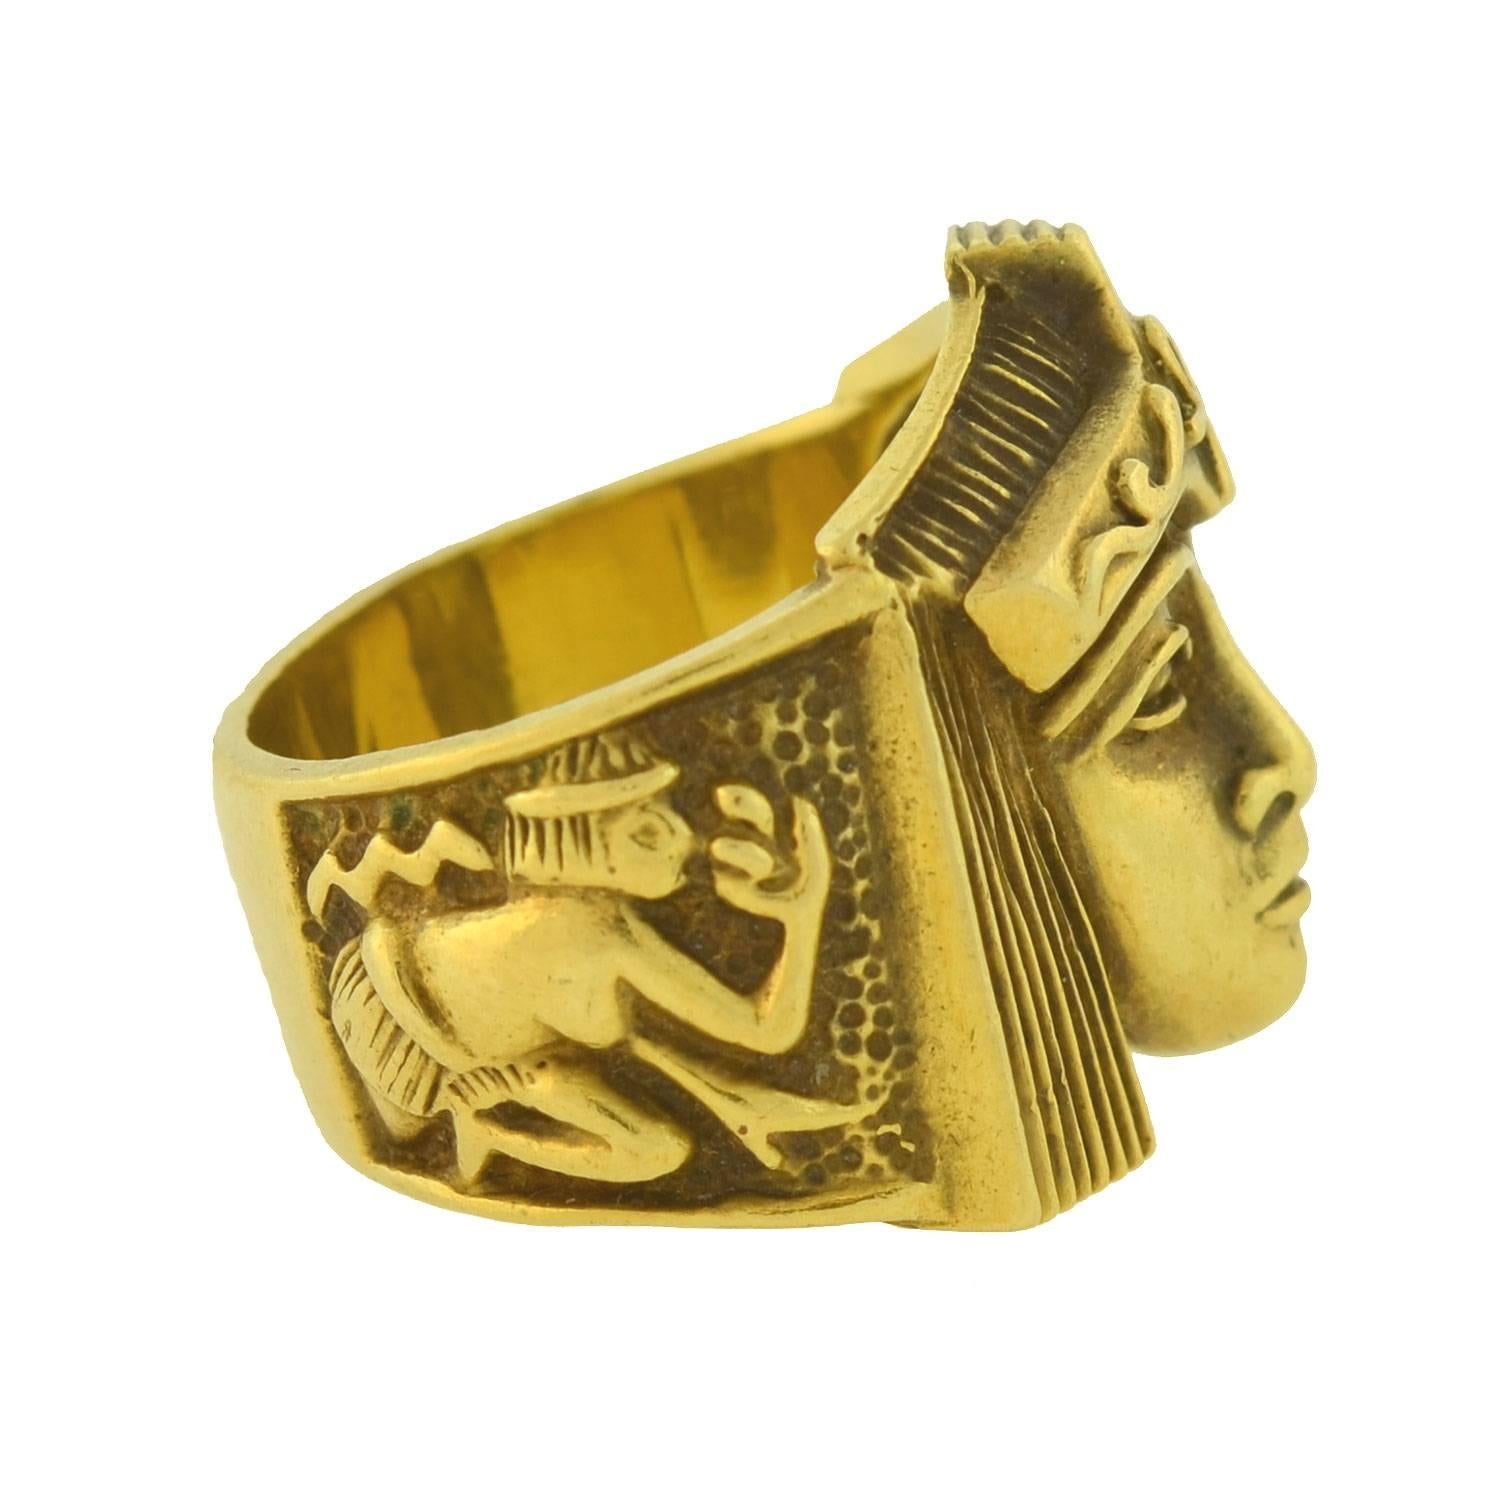 A fabulous Vintage Egyptian revival-style ring from the 1970s era! Crafted in 18kt yellow gold, this bold piece is particularly large in size and look and has a spectacular sculptural design, depicting a strong Egyptian face. The 3-dimensional image